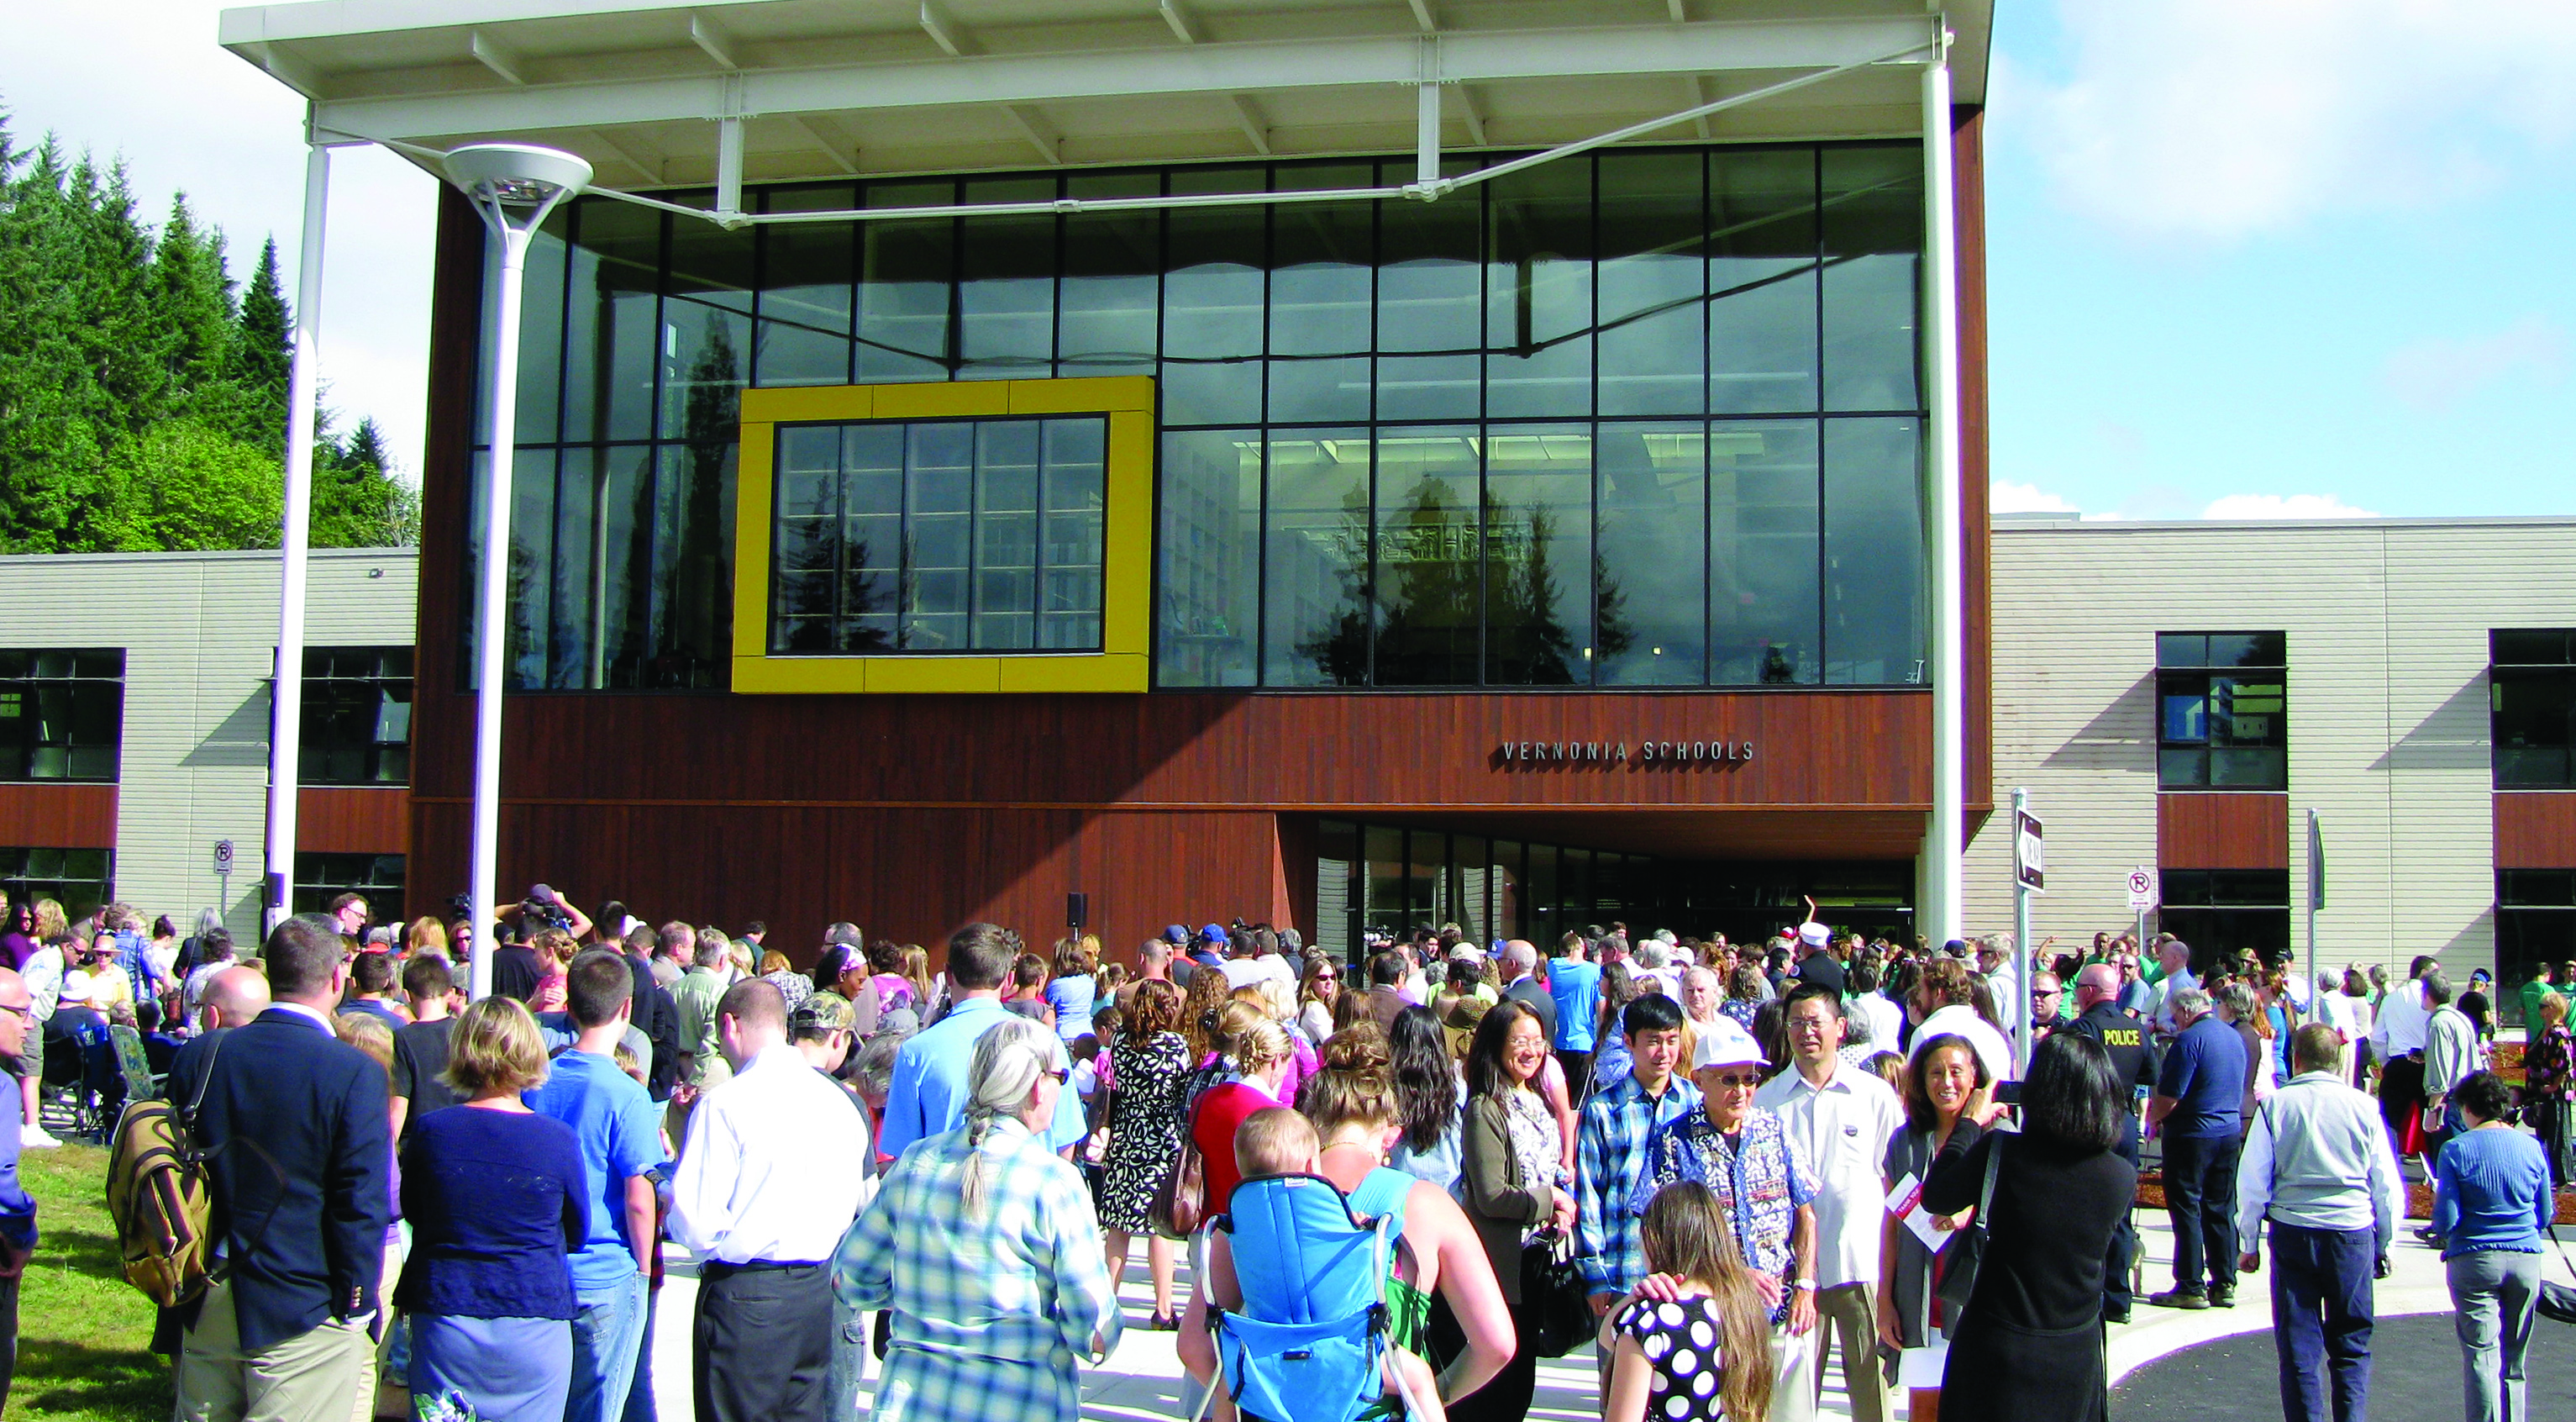 Grand opening of Vernonia Schools on August 21, 2012